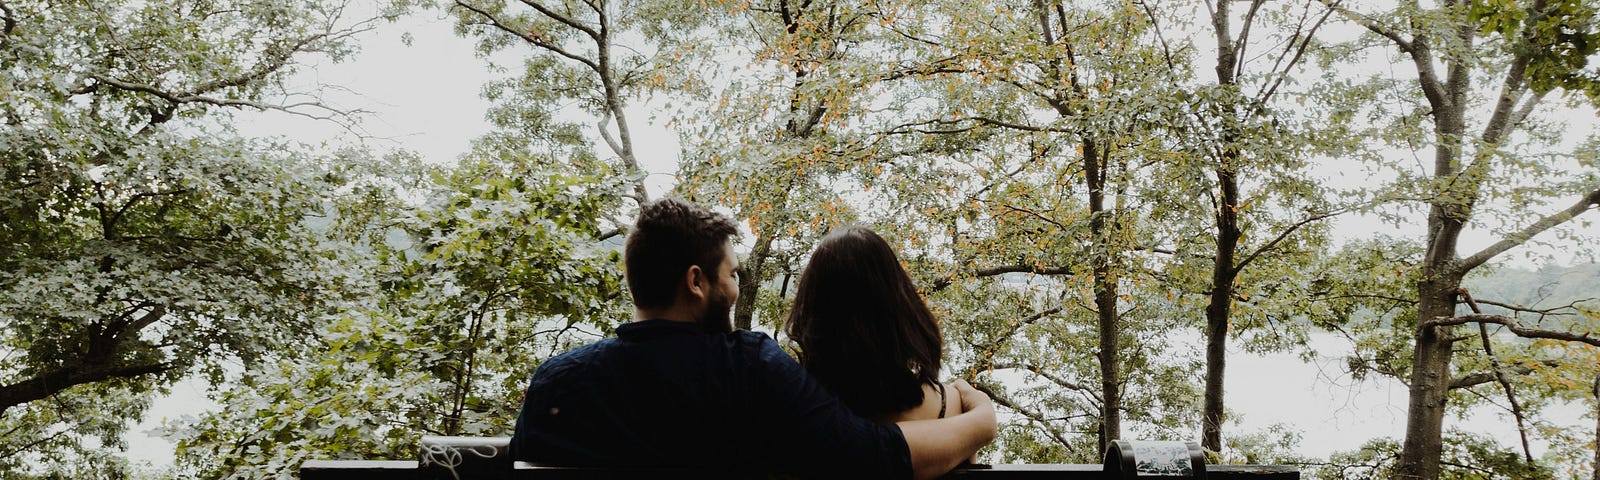 Back view of young couple on park bench, viewing trees. His arm is around her shoulder.